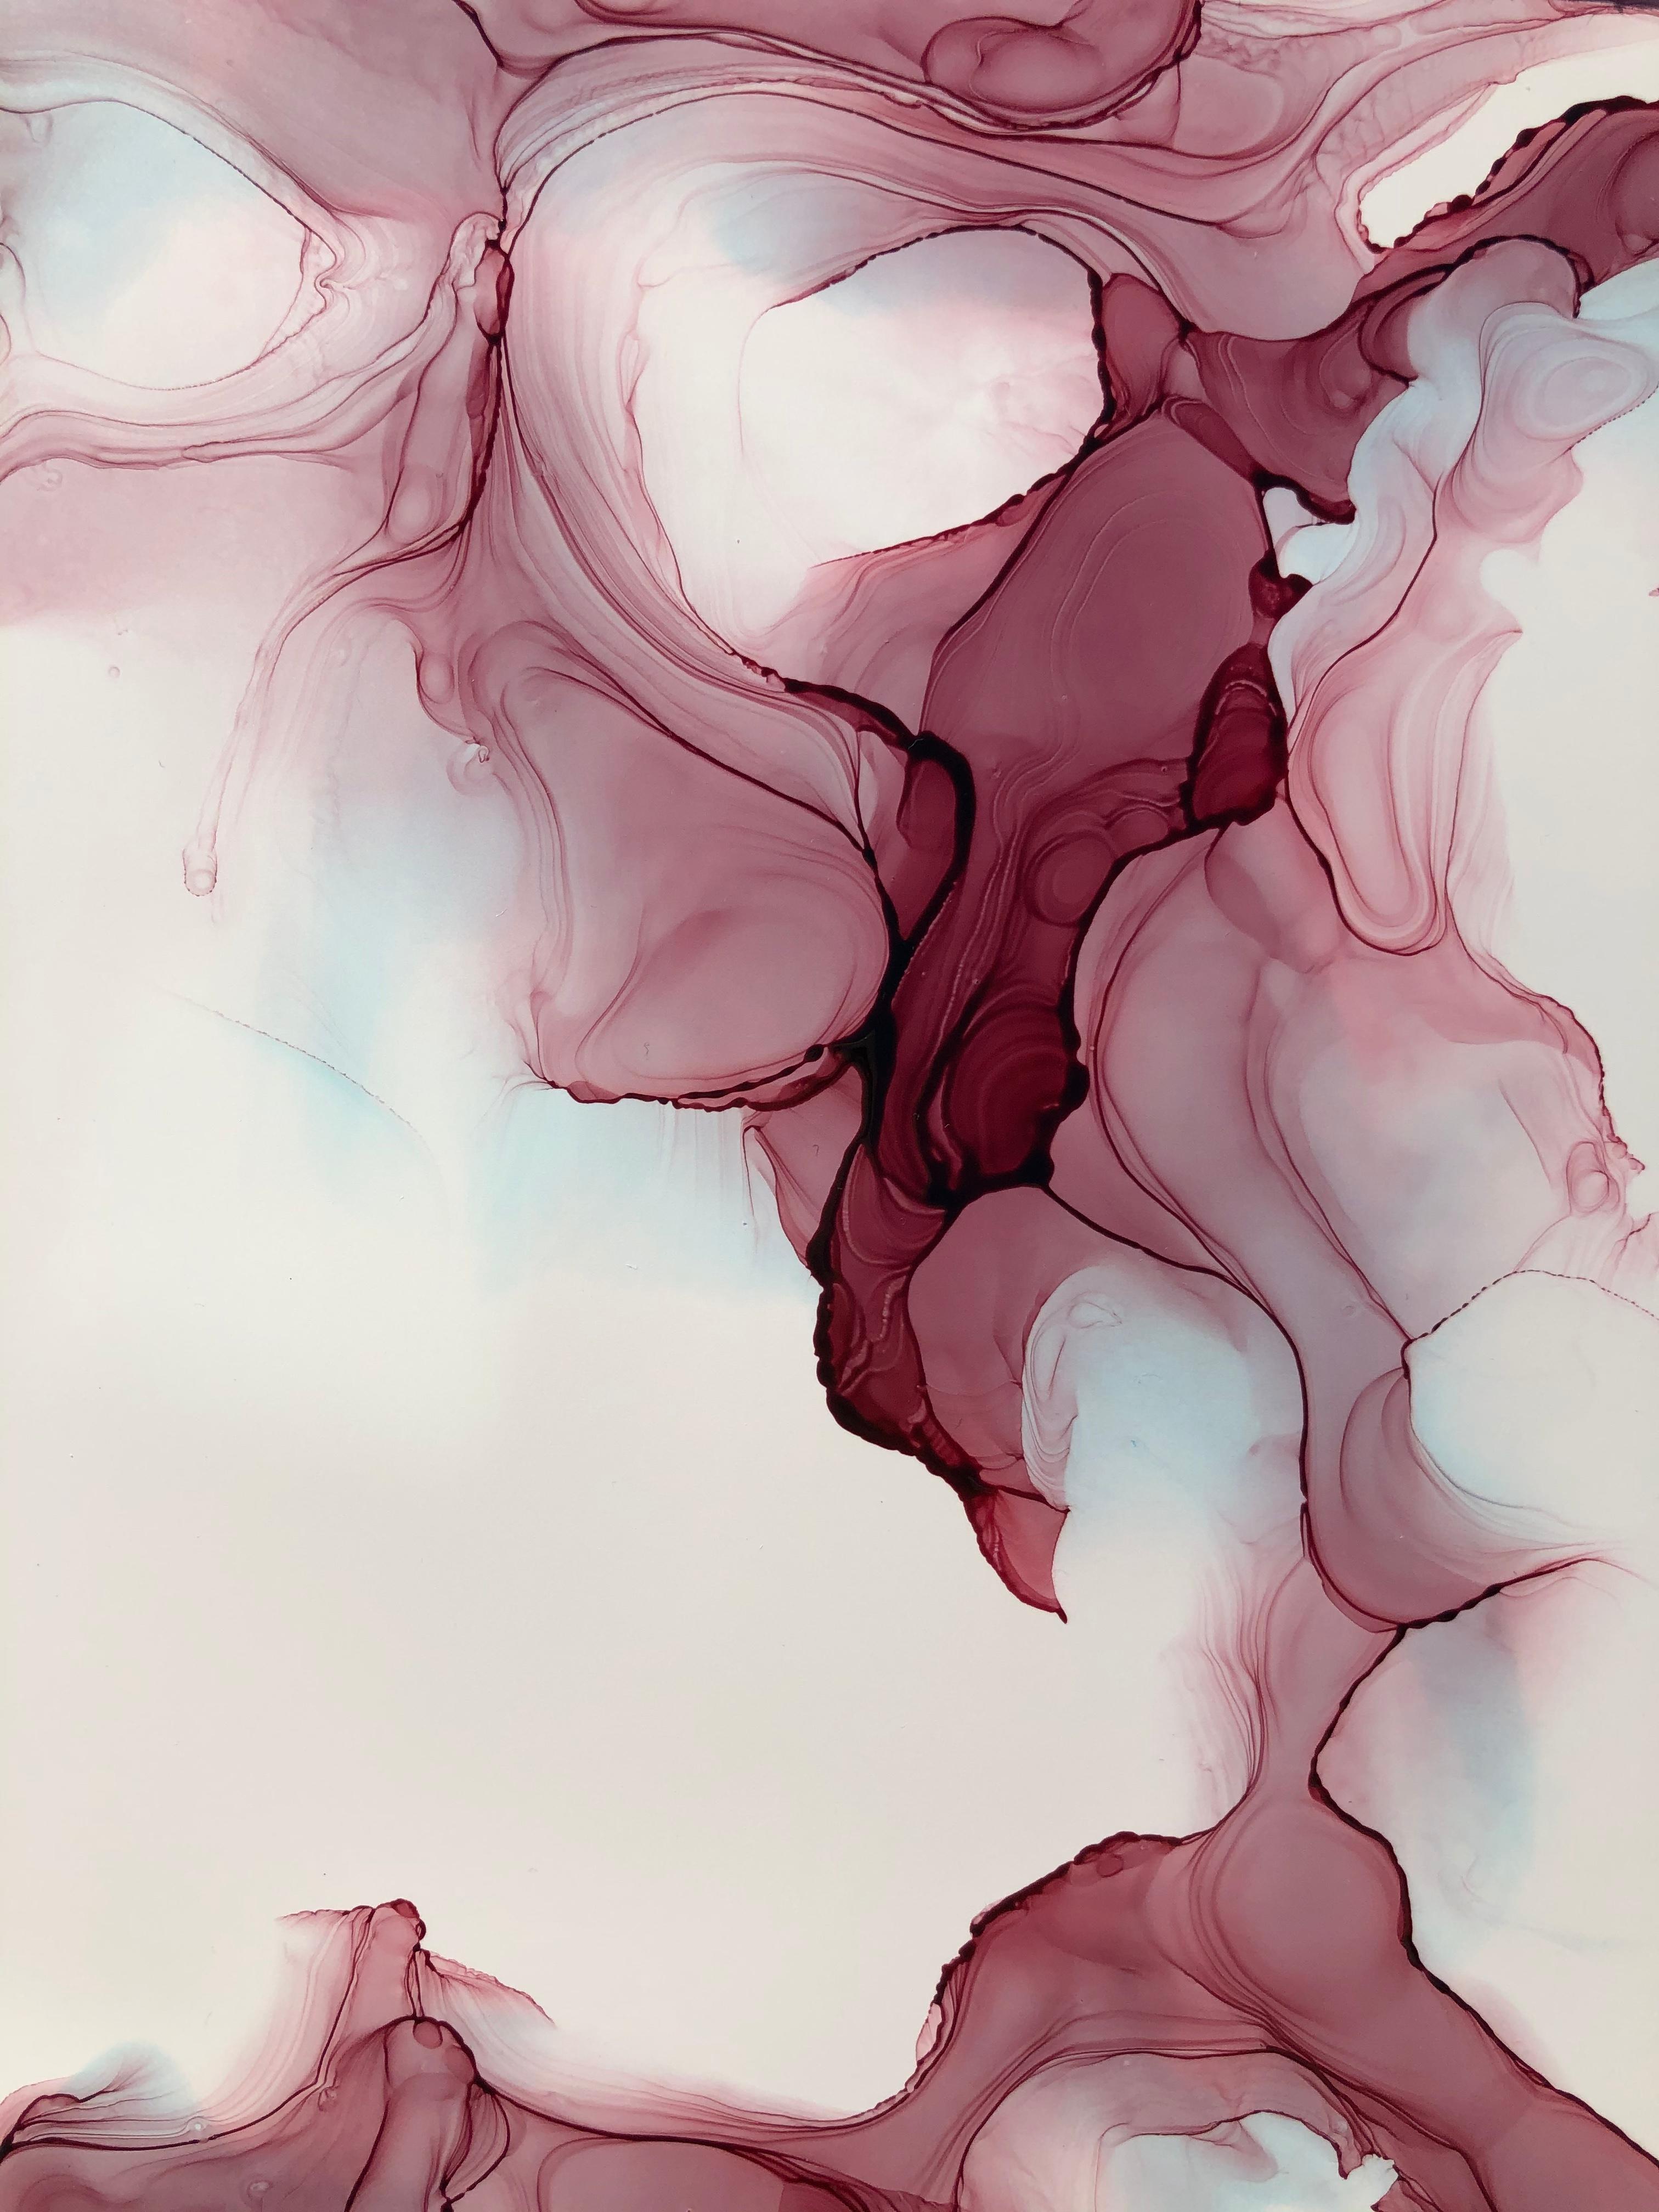 Line of fate-abstraction art, made in pale pink, light blue, rose colored 1